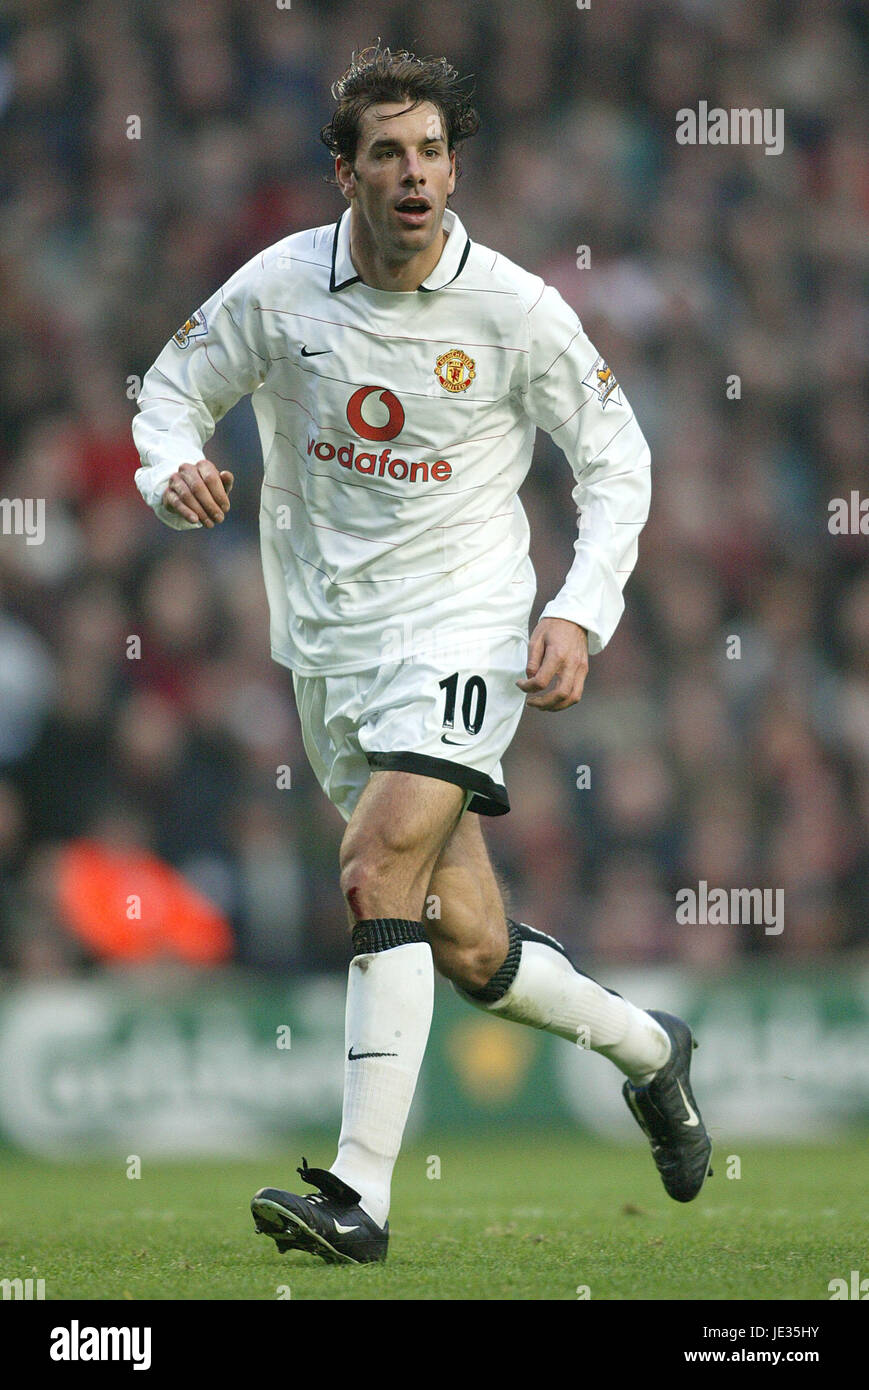 RUUD VAN NISTELROOY MANCHESTER UNITED FC ANFIELD LIVERPOOL ENGLAND 09 November 2003 Stock Photo